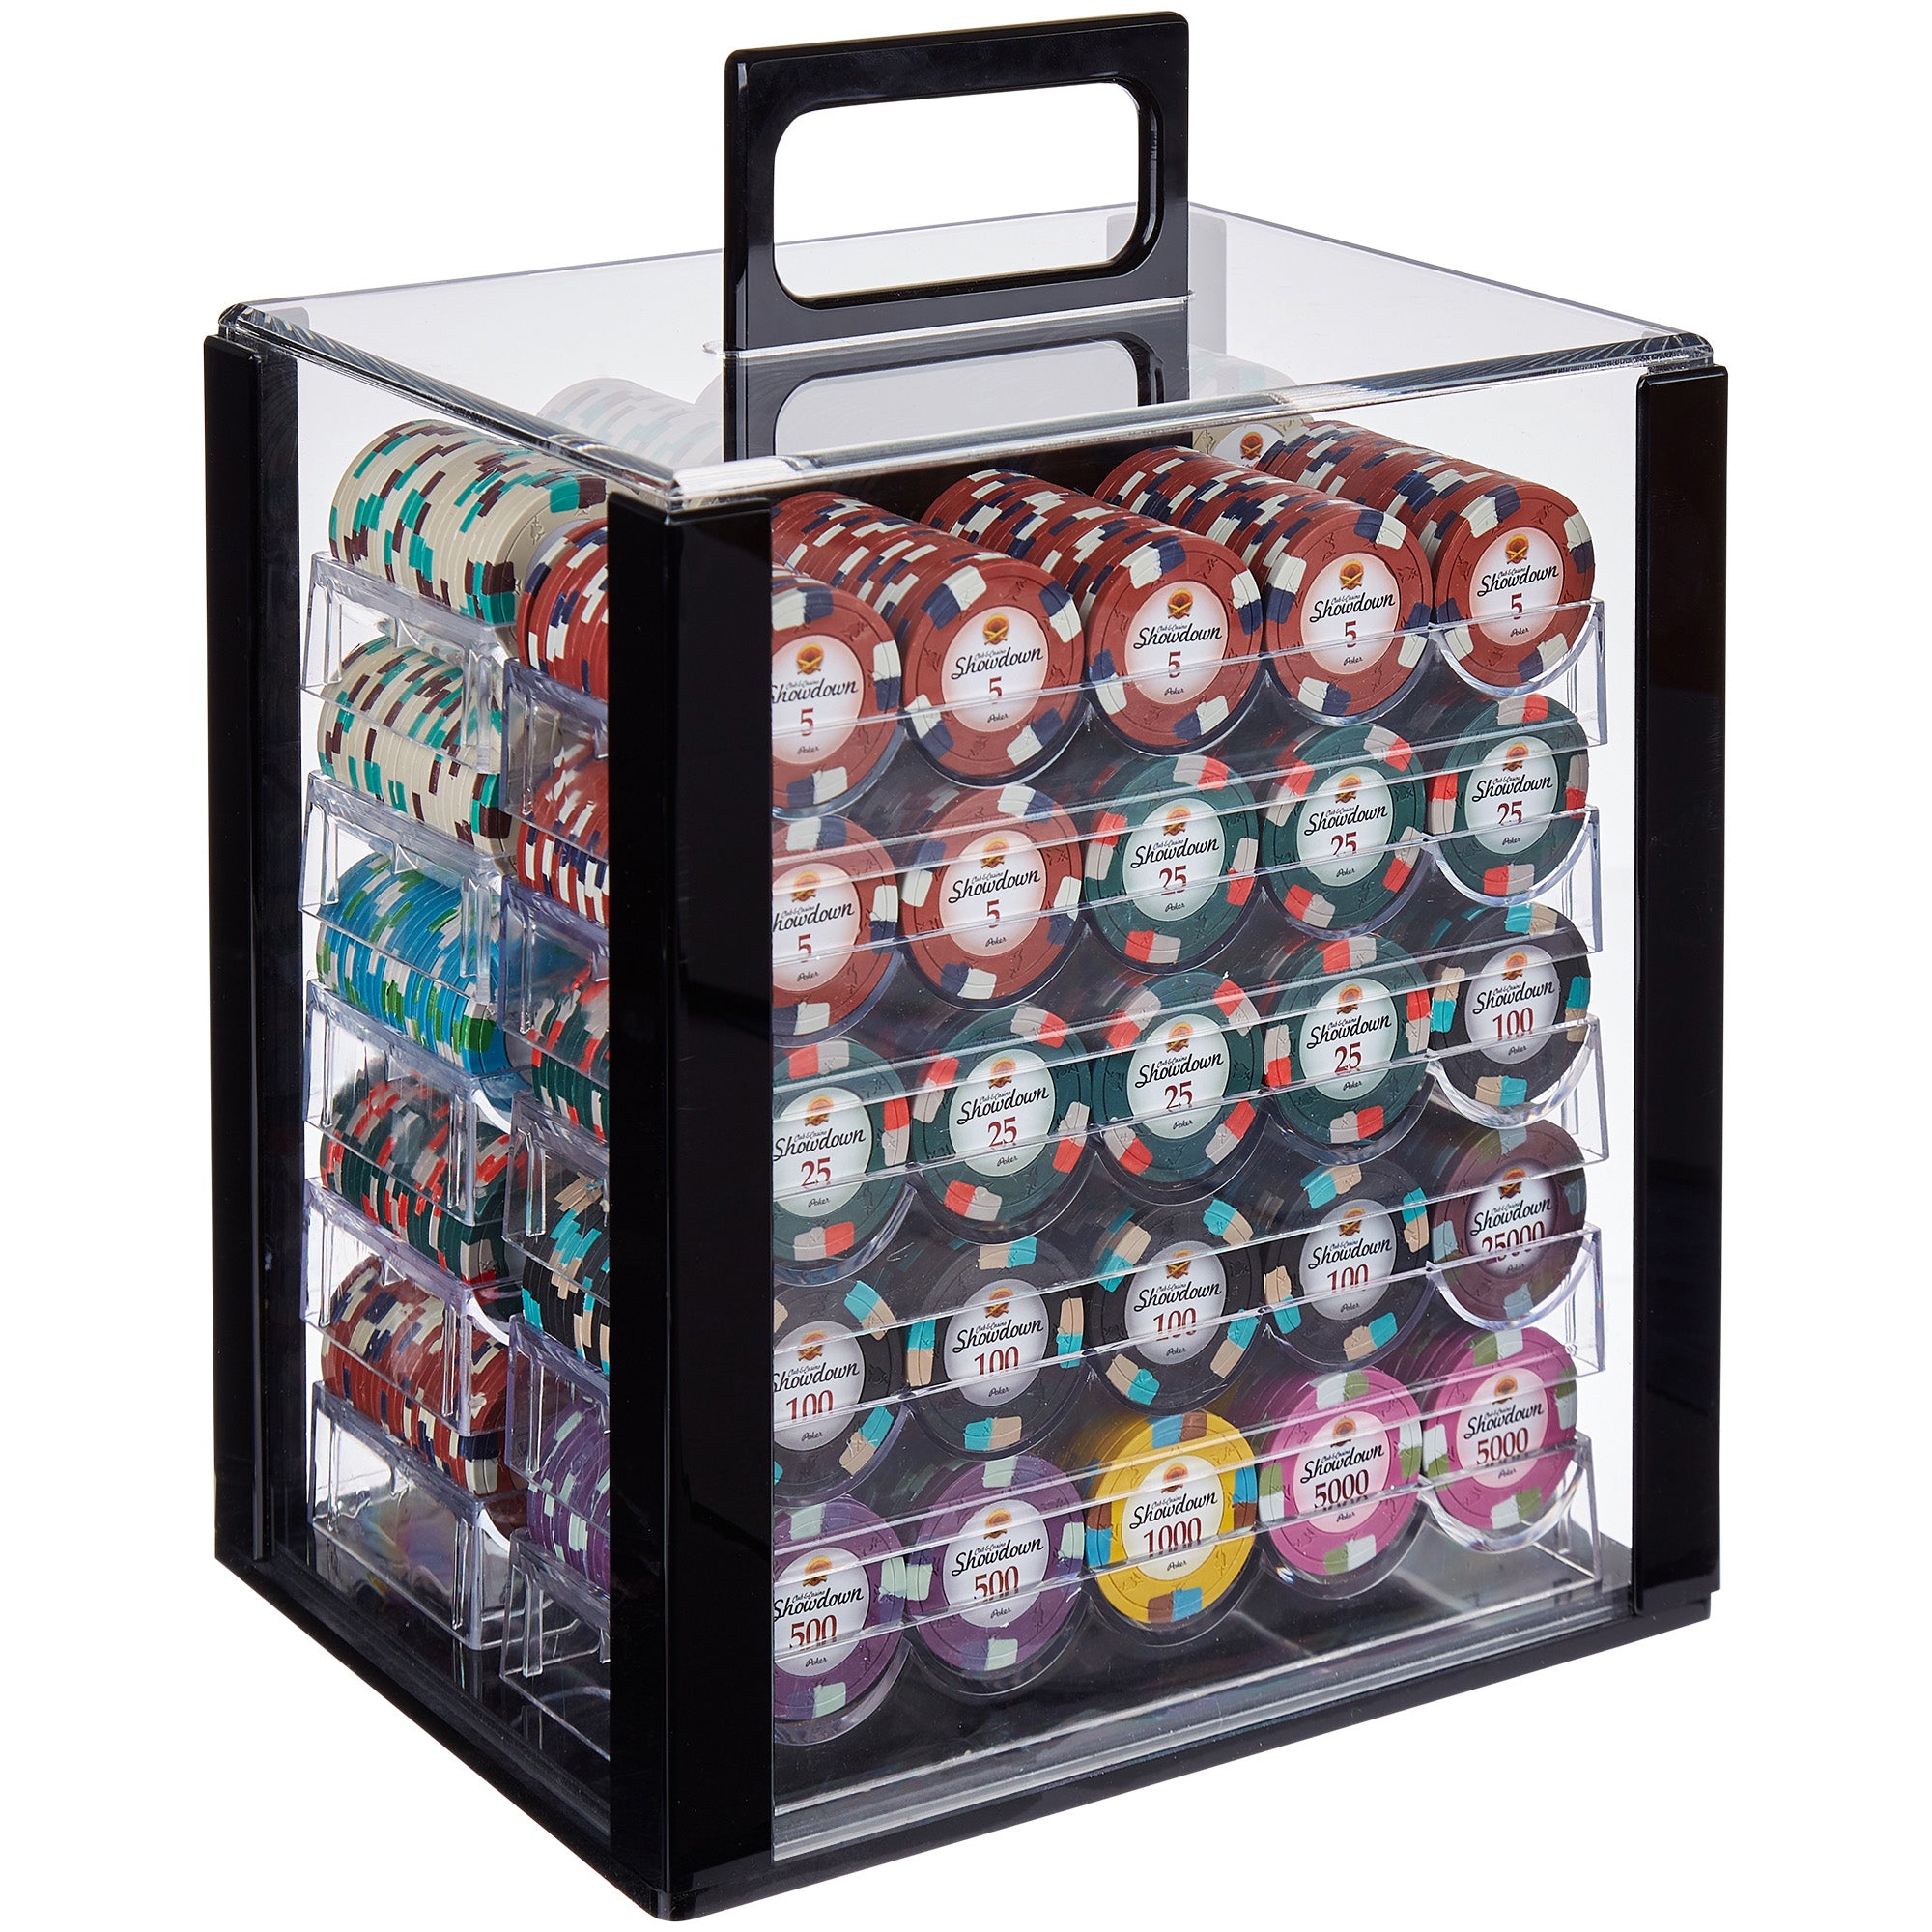 Showdown 13.5-gram Poker Chip Set in Acrylic Case (1000 Count) - Clay Composite